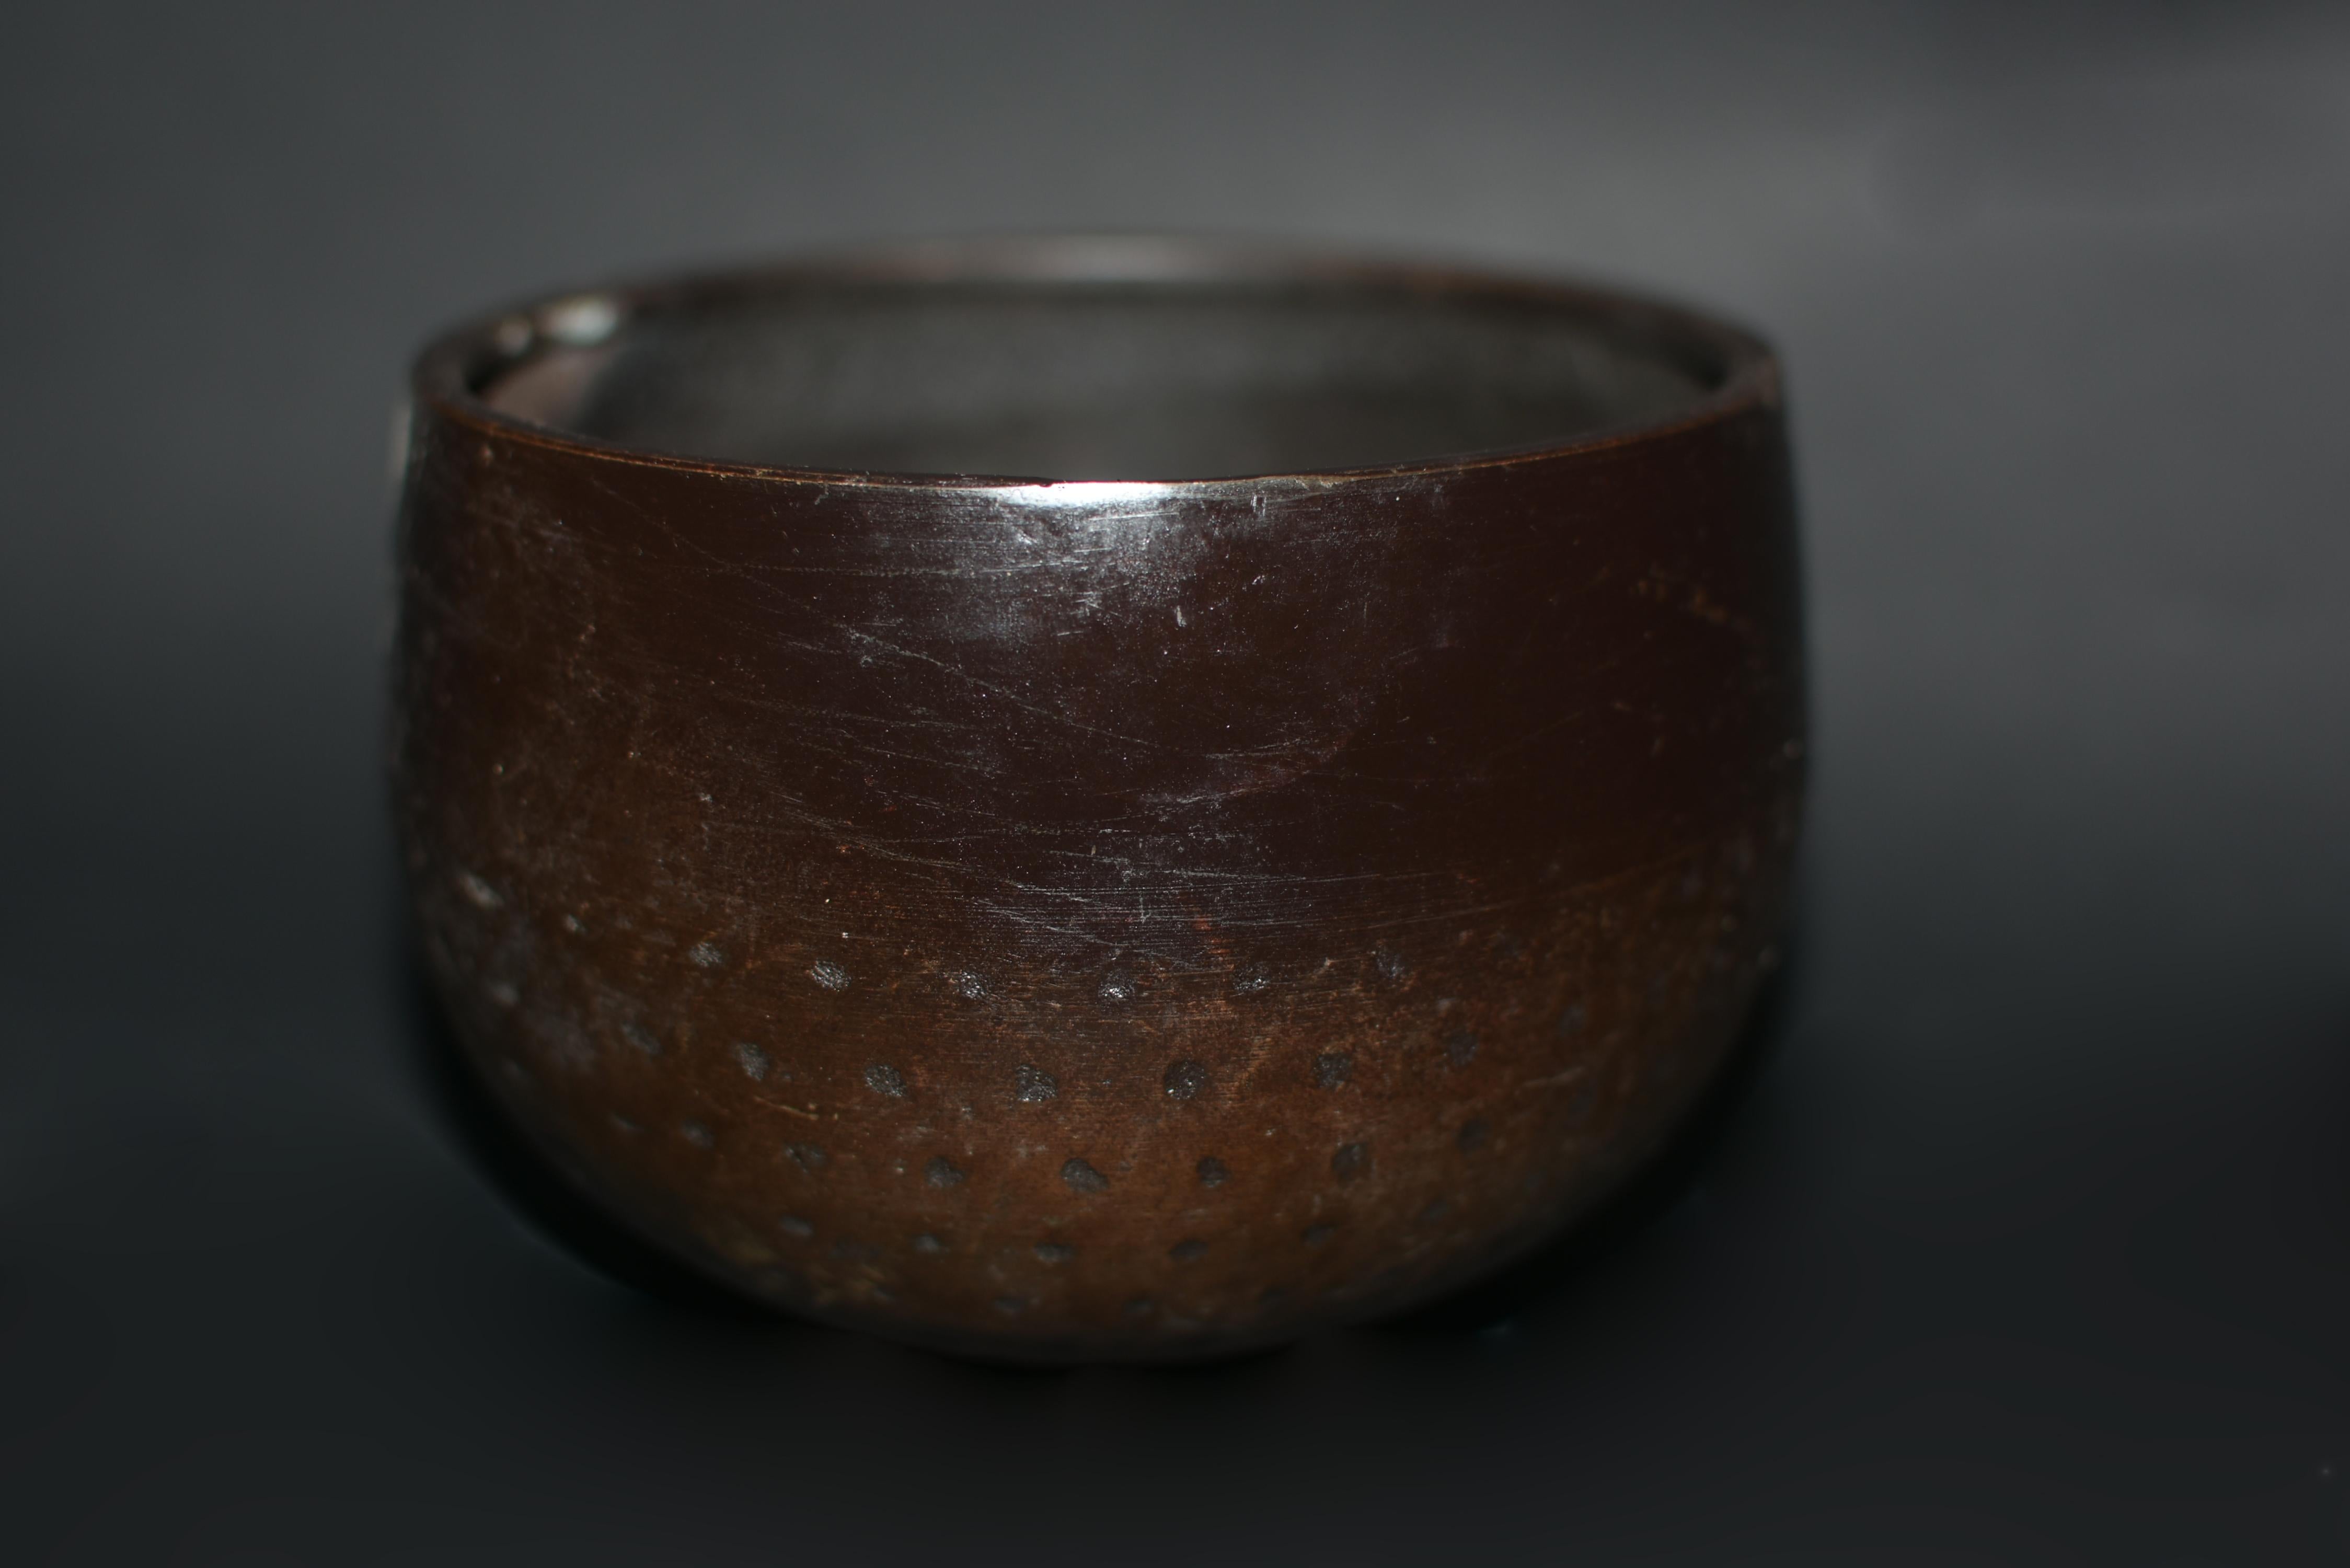 A beautiful early 20th century Japanese singing bowl of C5 tone, exhibiting rows of hand hammered divots, deliberate yet free, design with restraint, style consistent with the Japanese aesthetic for the simple, orderly, yet artistic form. A lacquer